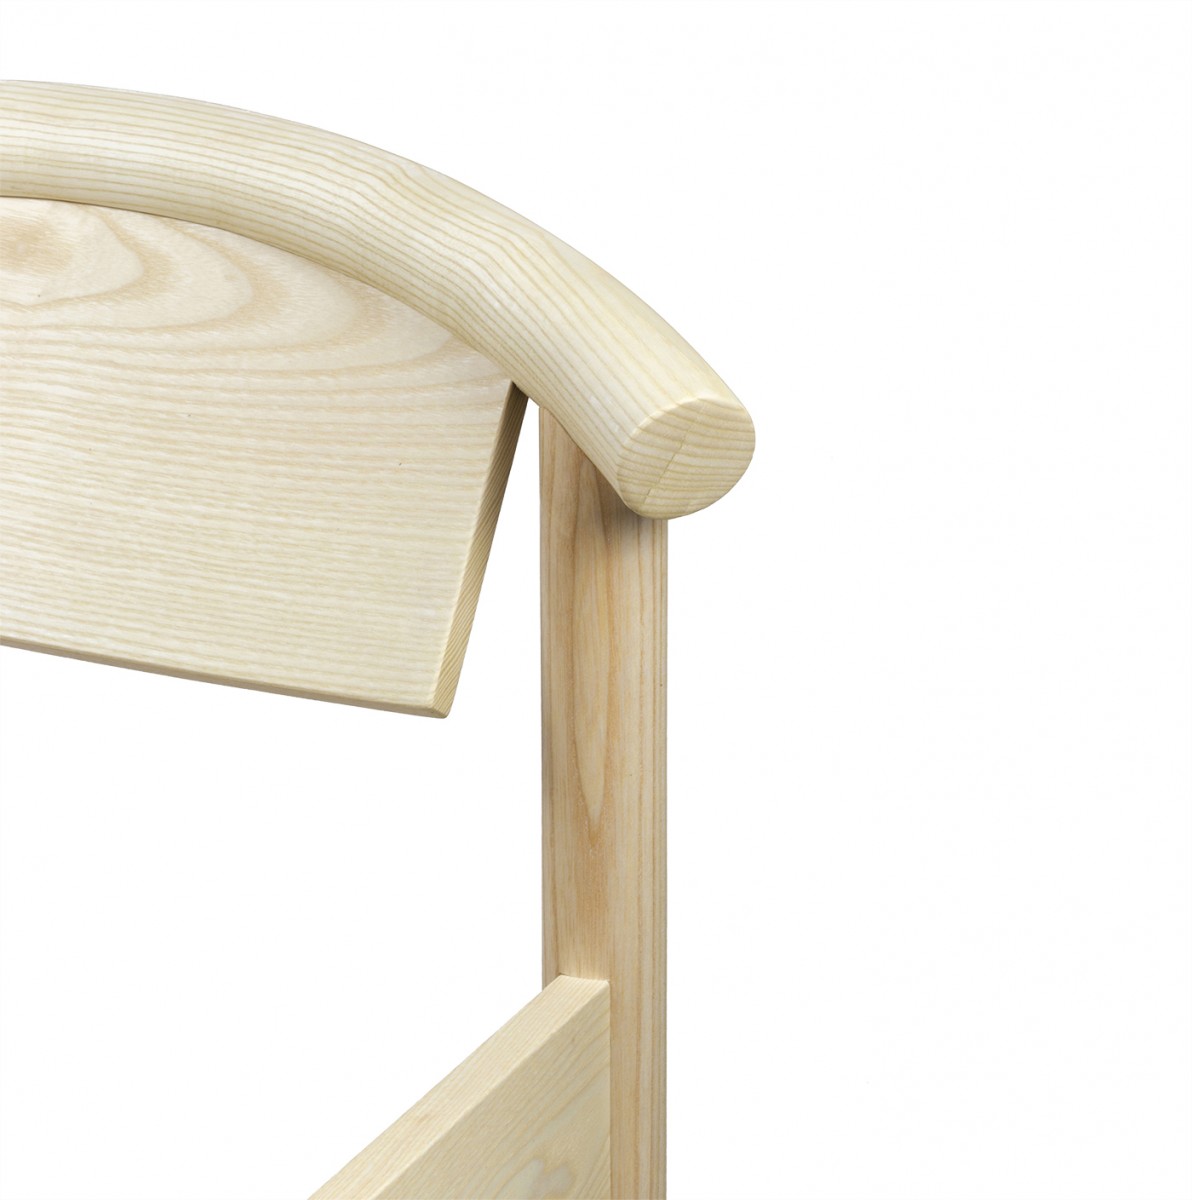 Plan Chair by Alessandro Gnocchi for Internoitaliano